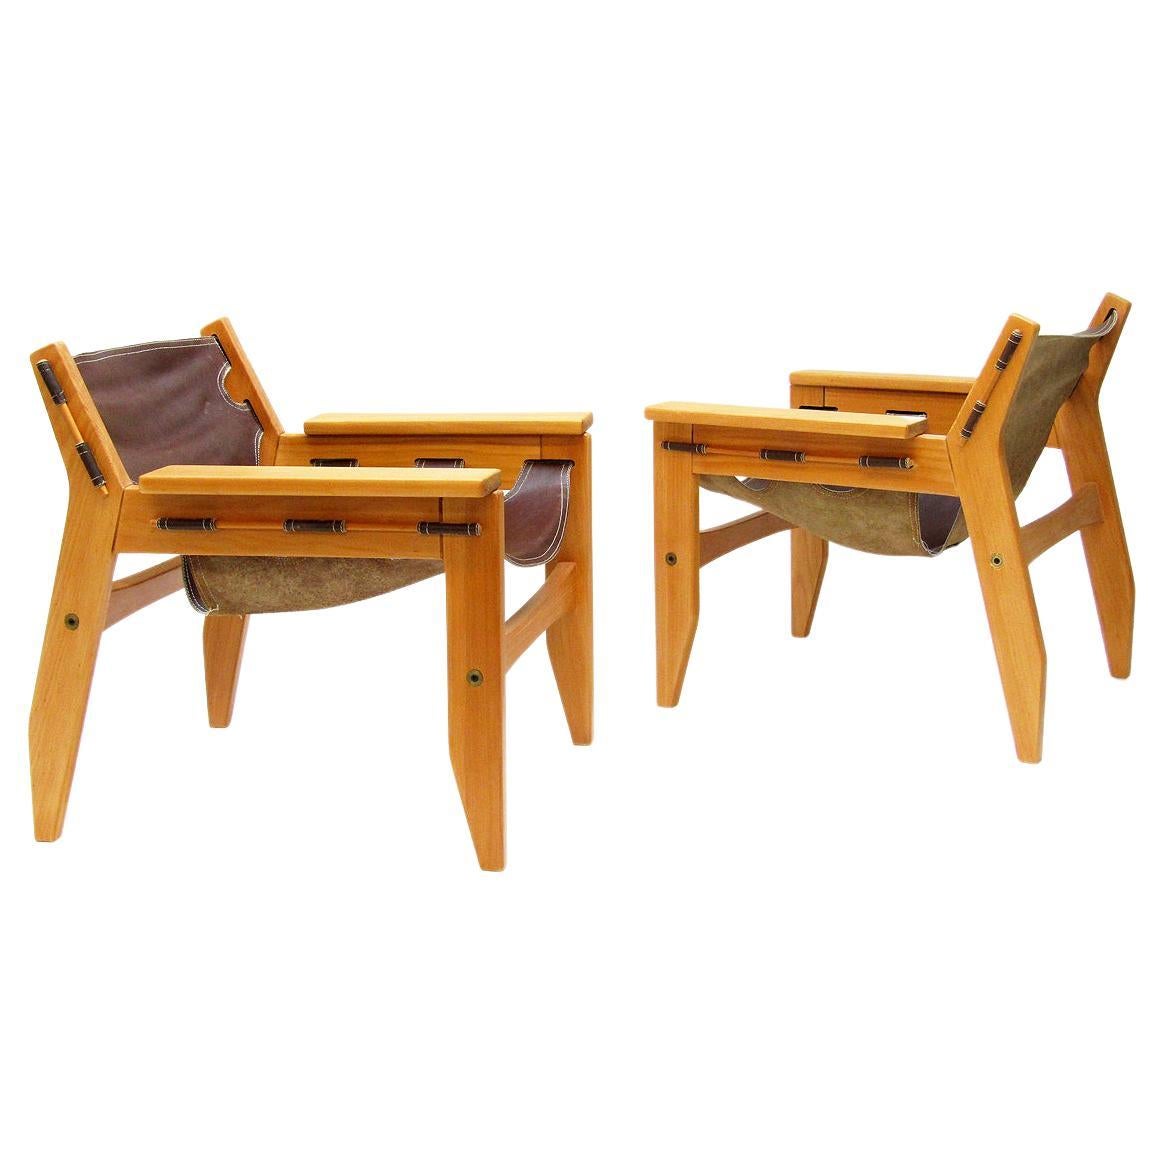 Two 1970s "Kilin" Lounge Chairs by Sergio Rodrigues for OCA